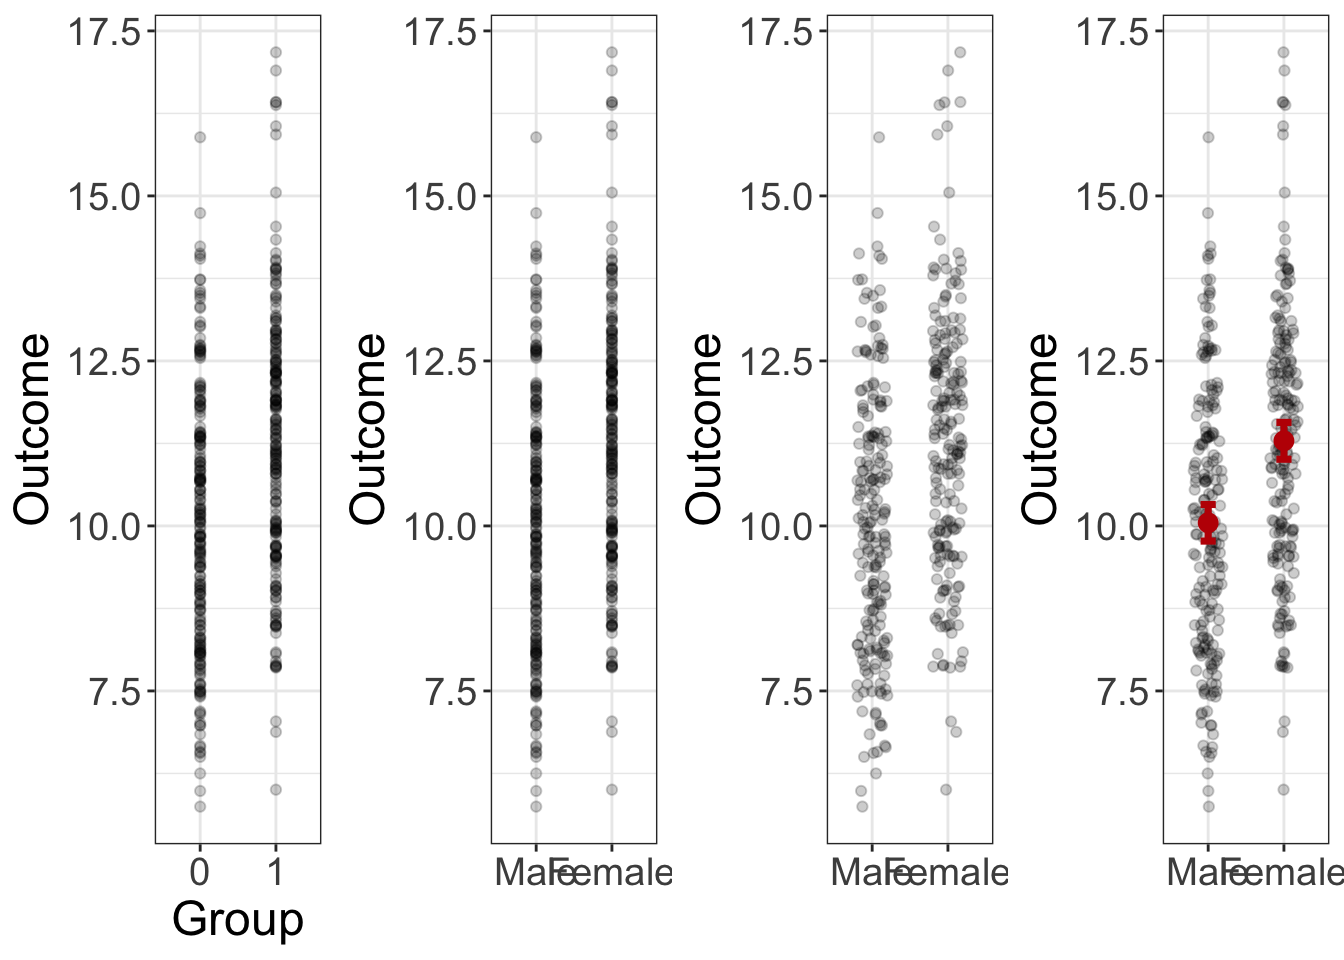 A 'Scatterplot' showing the grouping variable (gender in this case) on the X axis and the outcome on the Y axis.